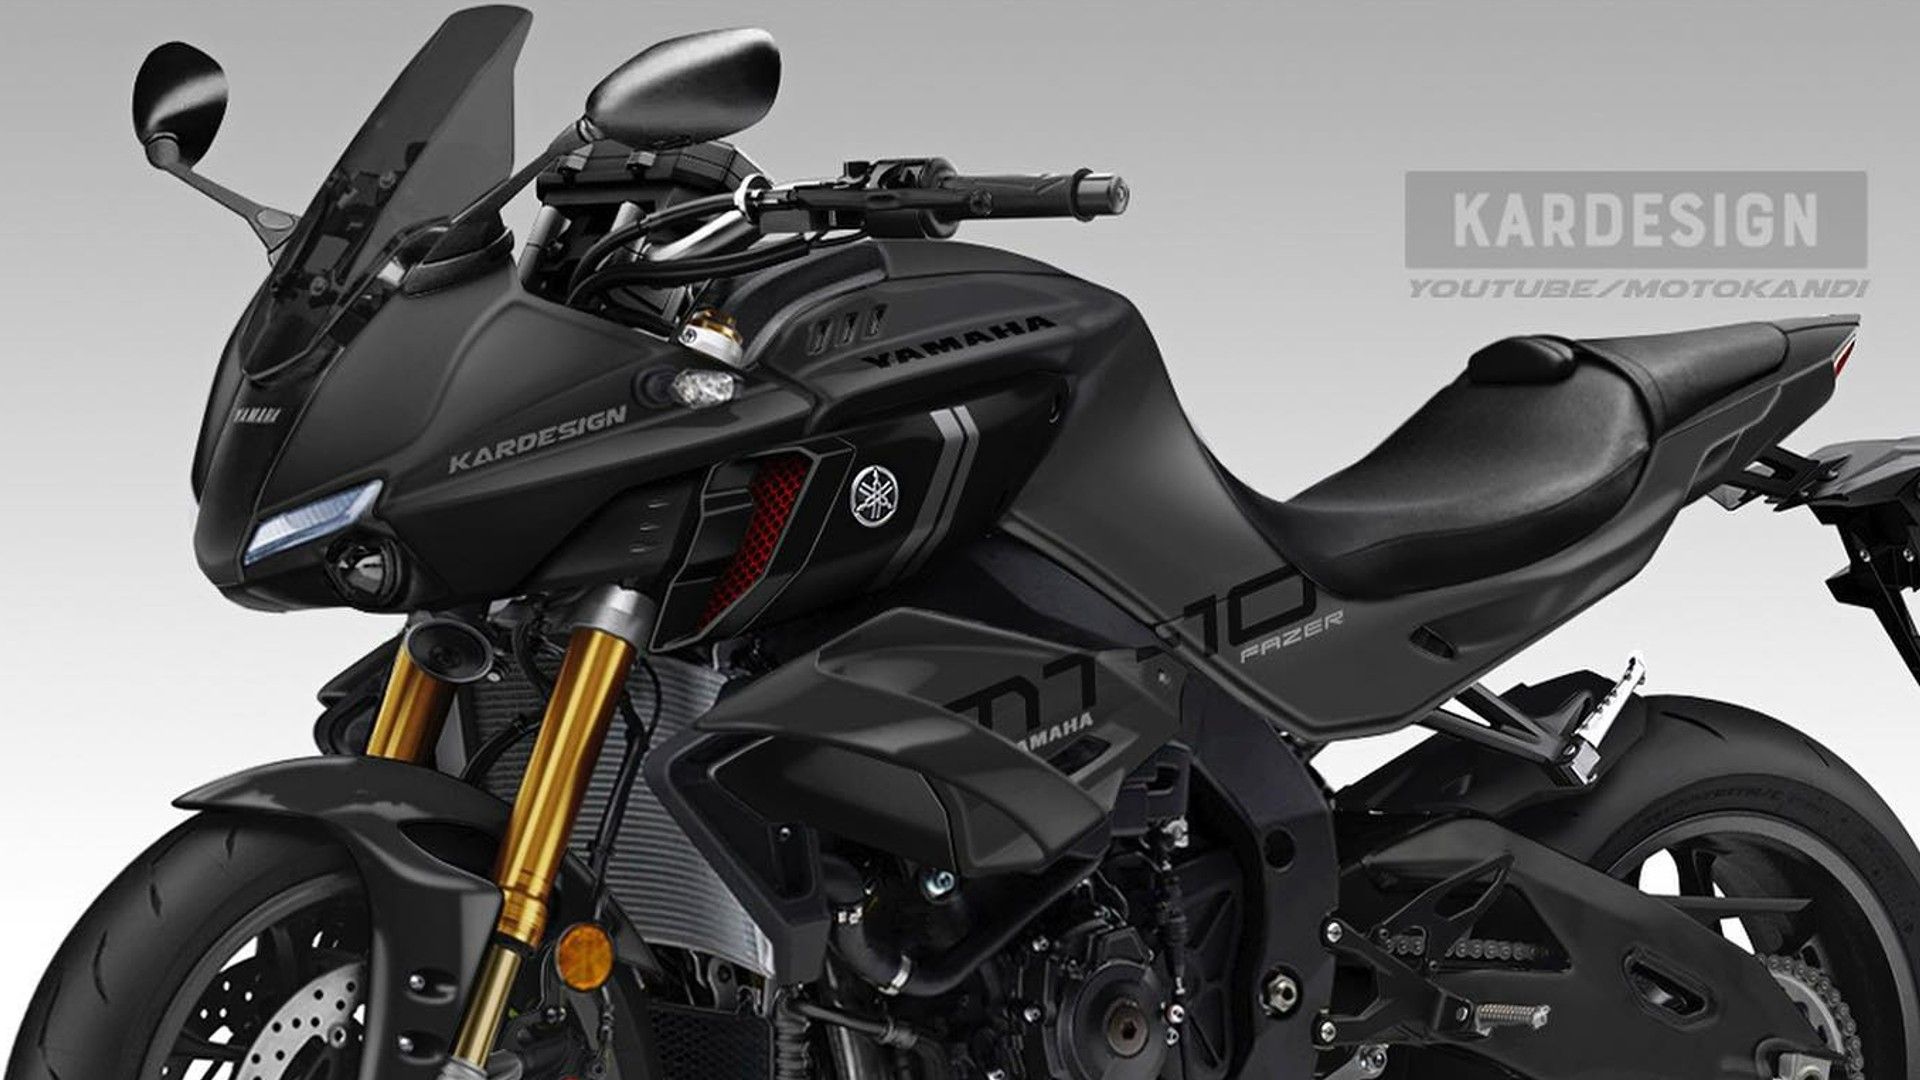 New Yamaha FZ1 1000) Looks As Hell In Its Modern Rendition